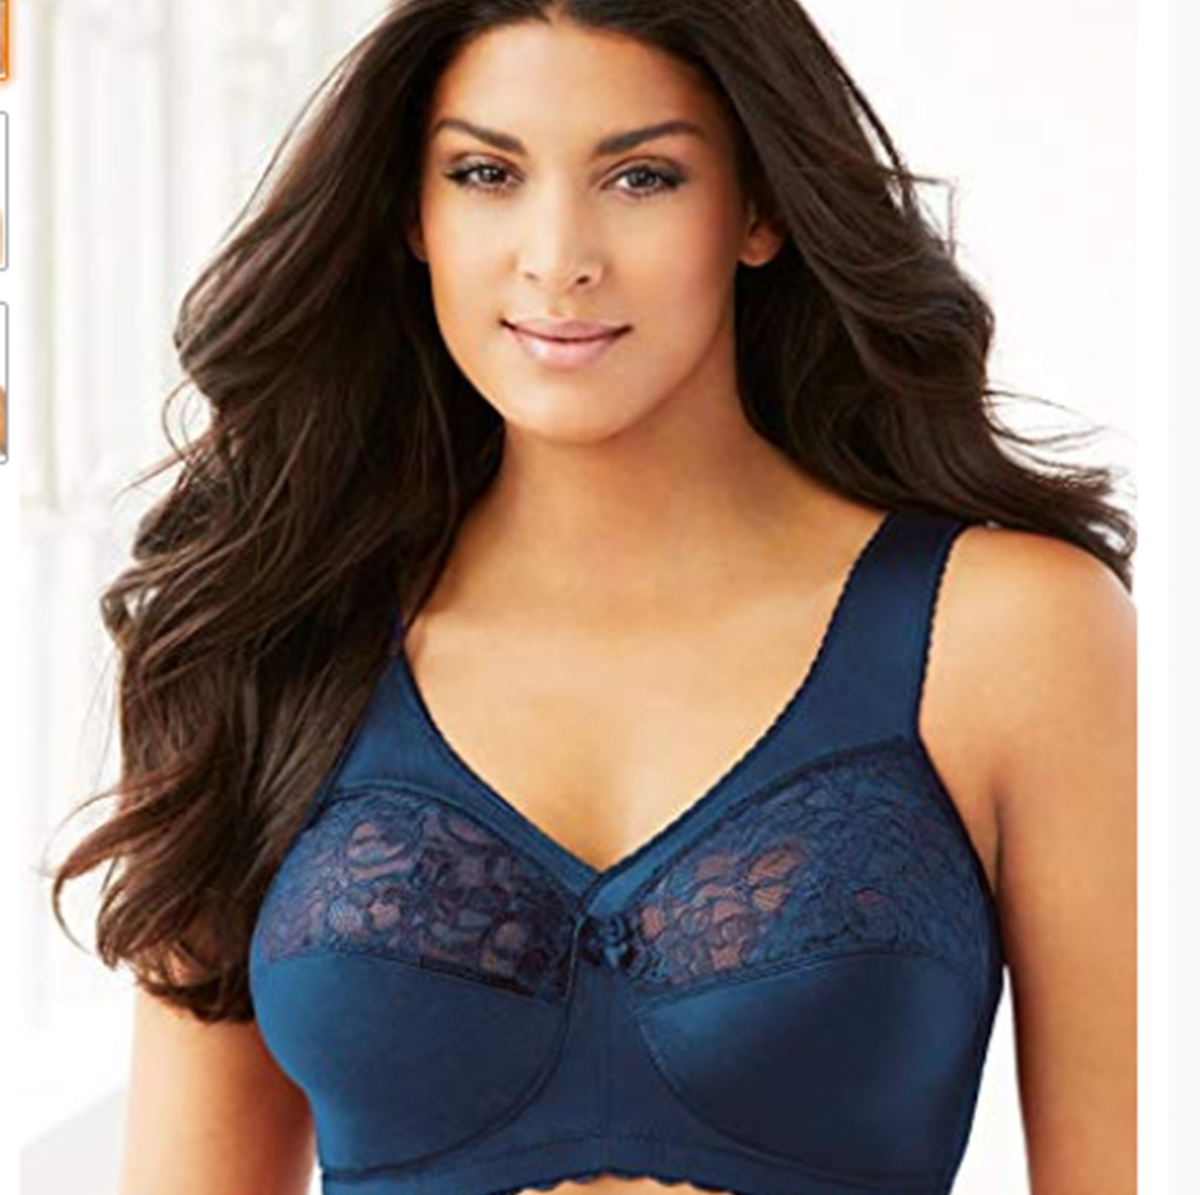 Best Bras that are made in the USA? : r/ABraThatFits